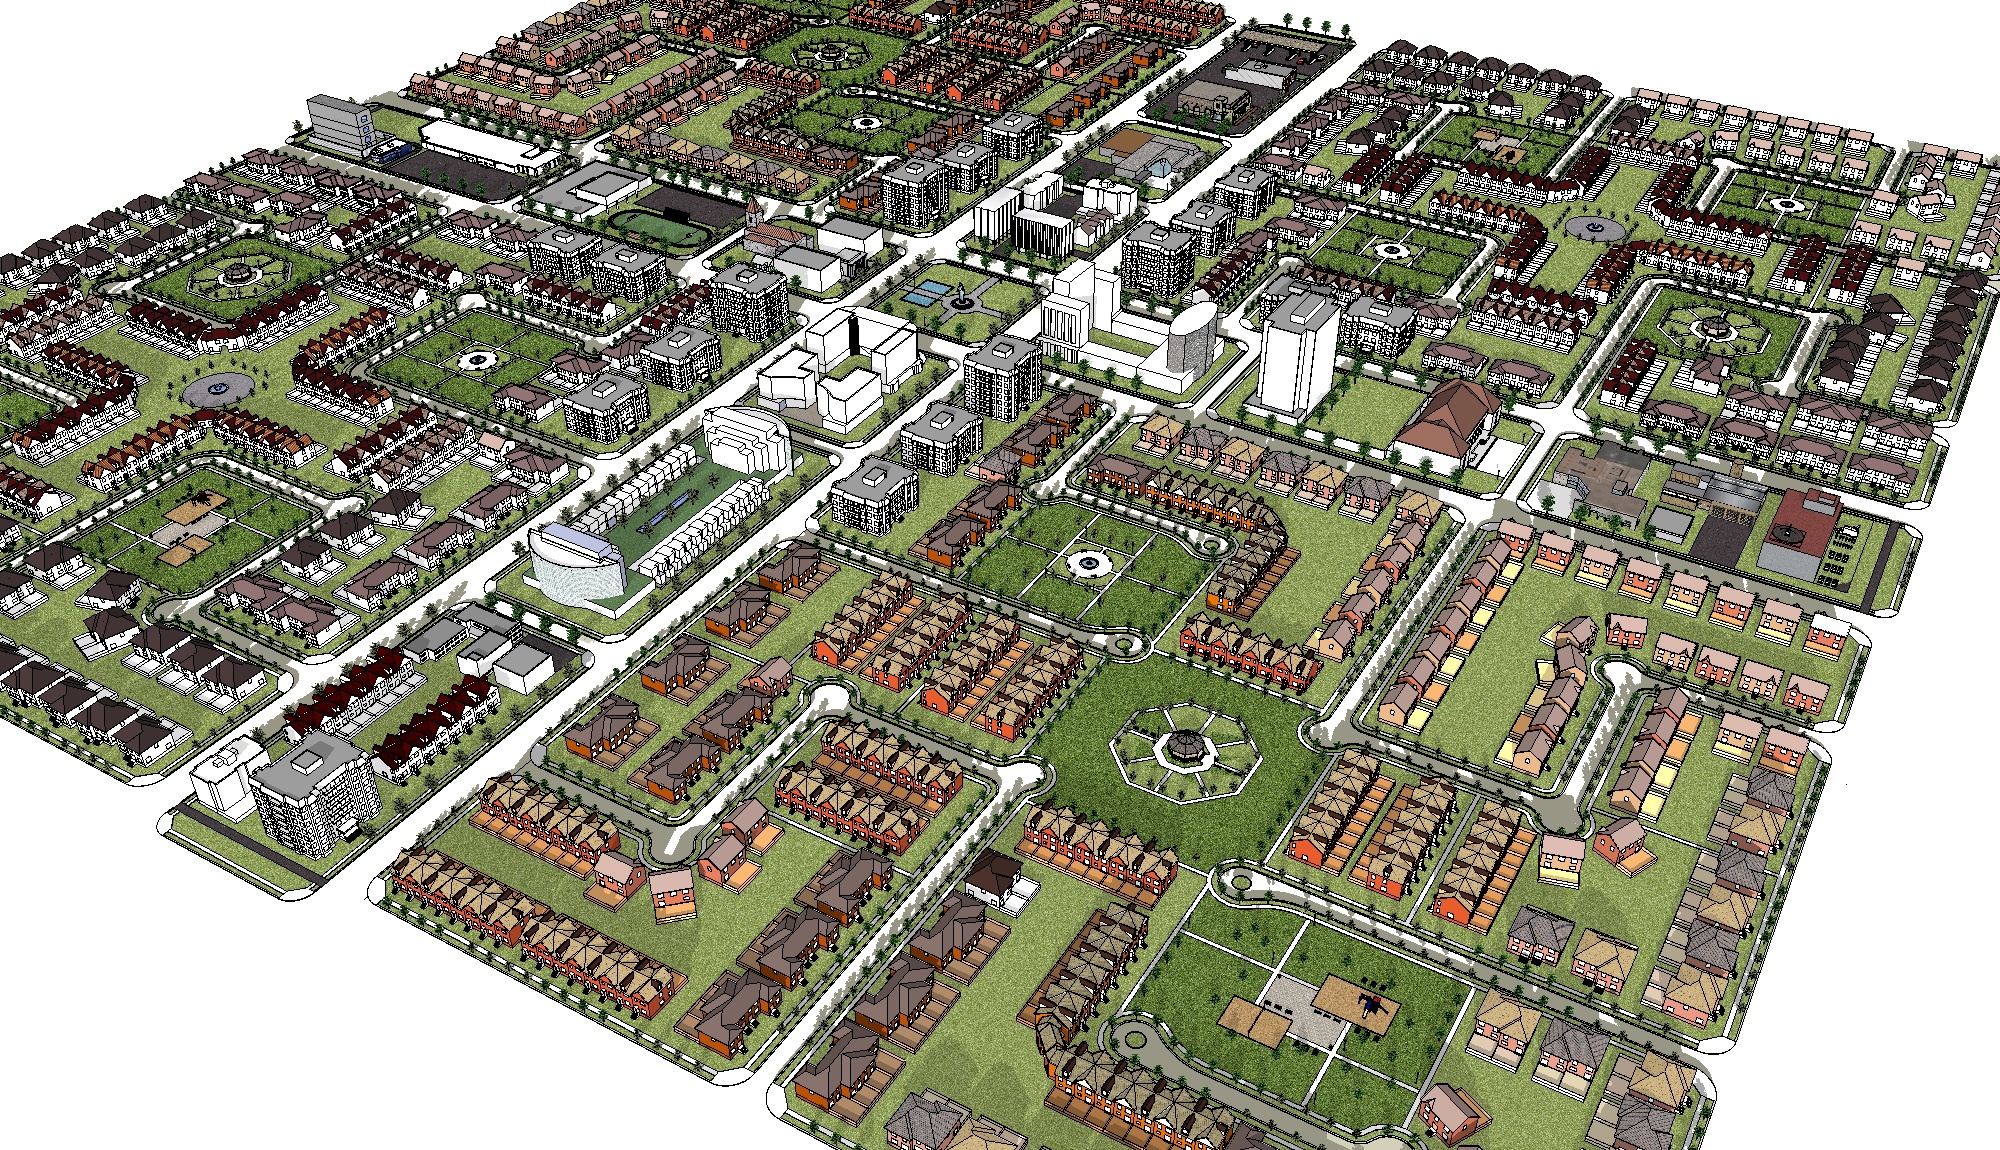 Image of a planned urban landscape: Local development planning is now with local councils